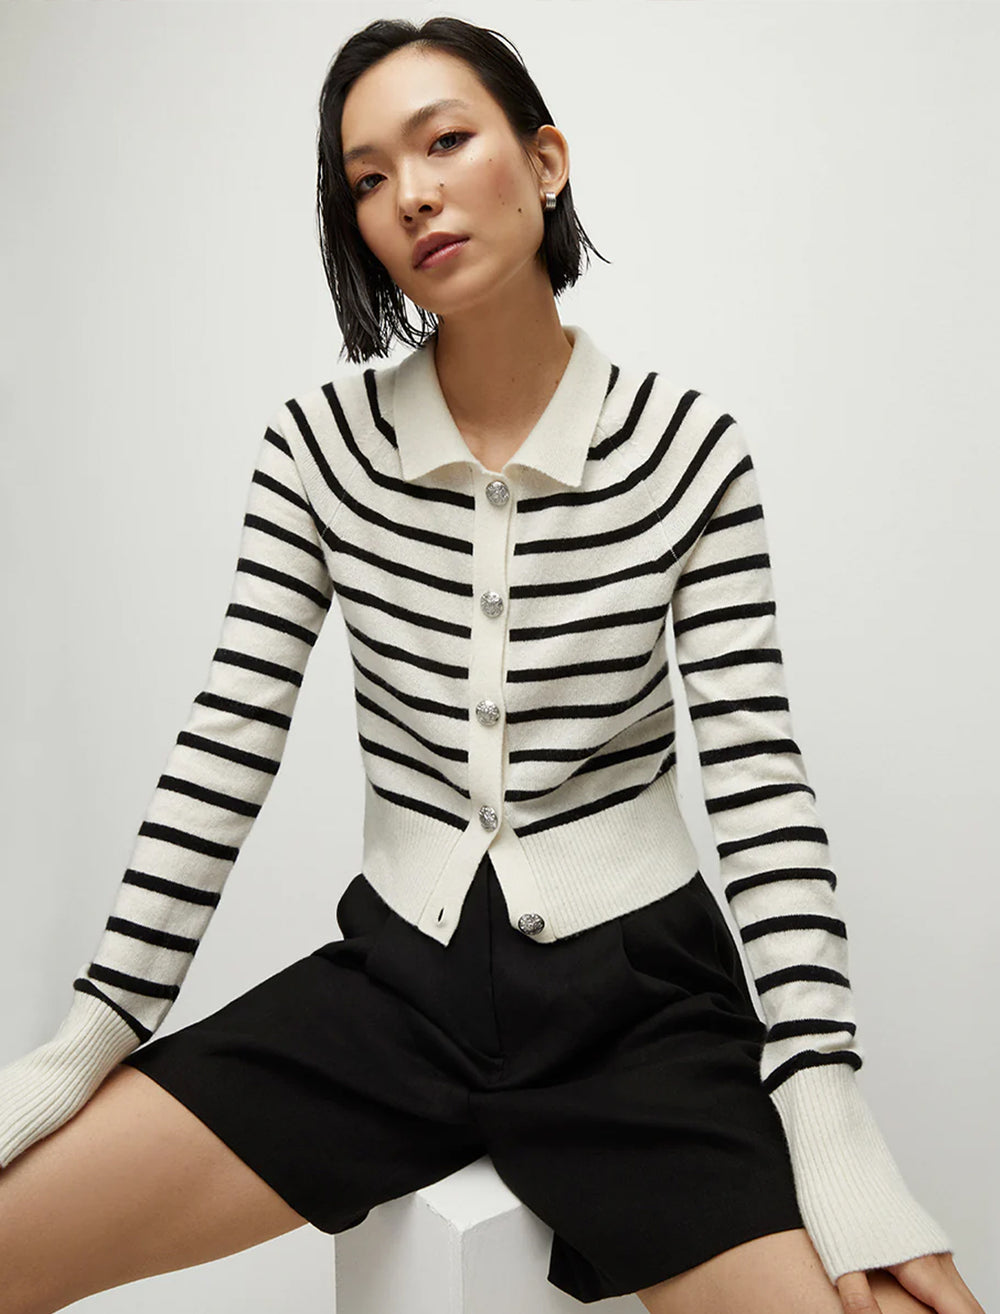 Model wearing Veronica Beard's cheshire cardigan in off-white and black stripe.